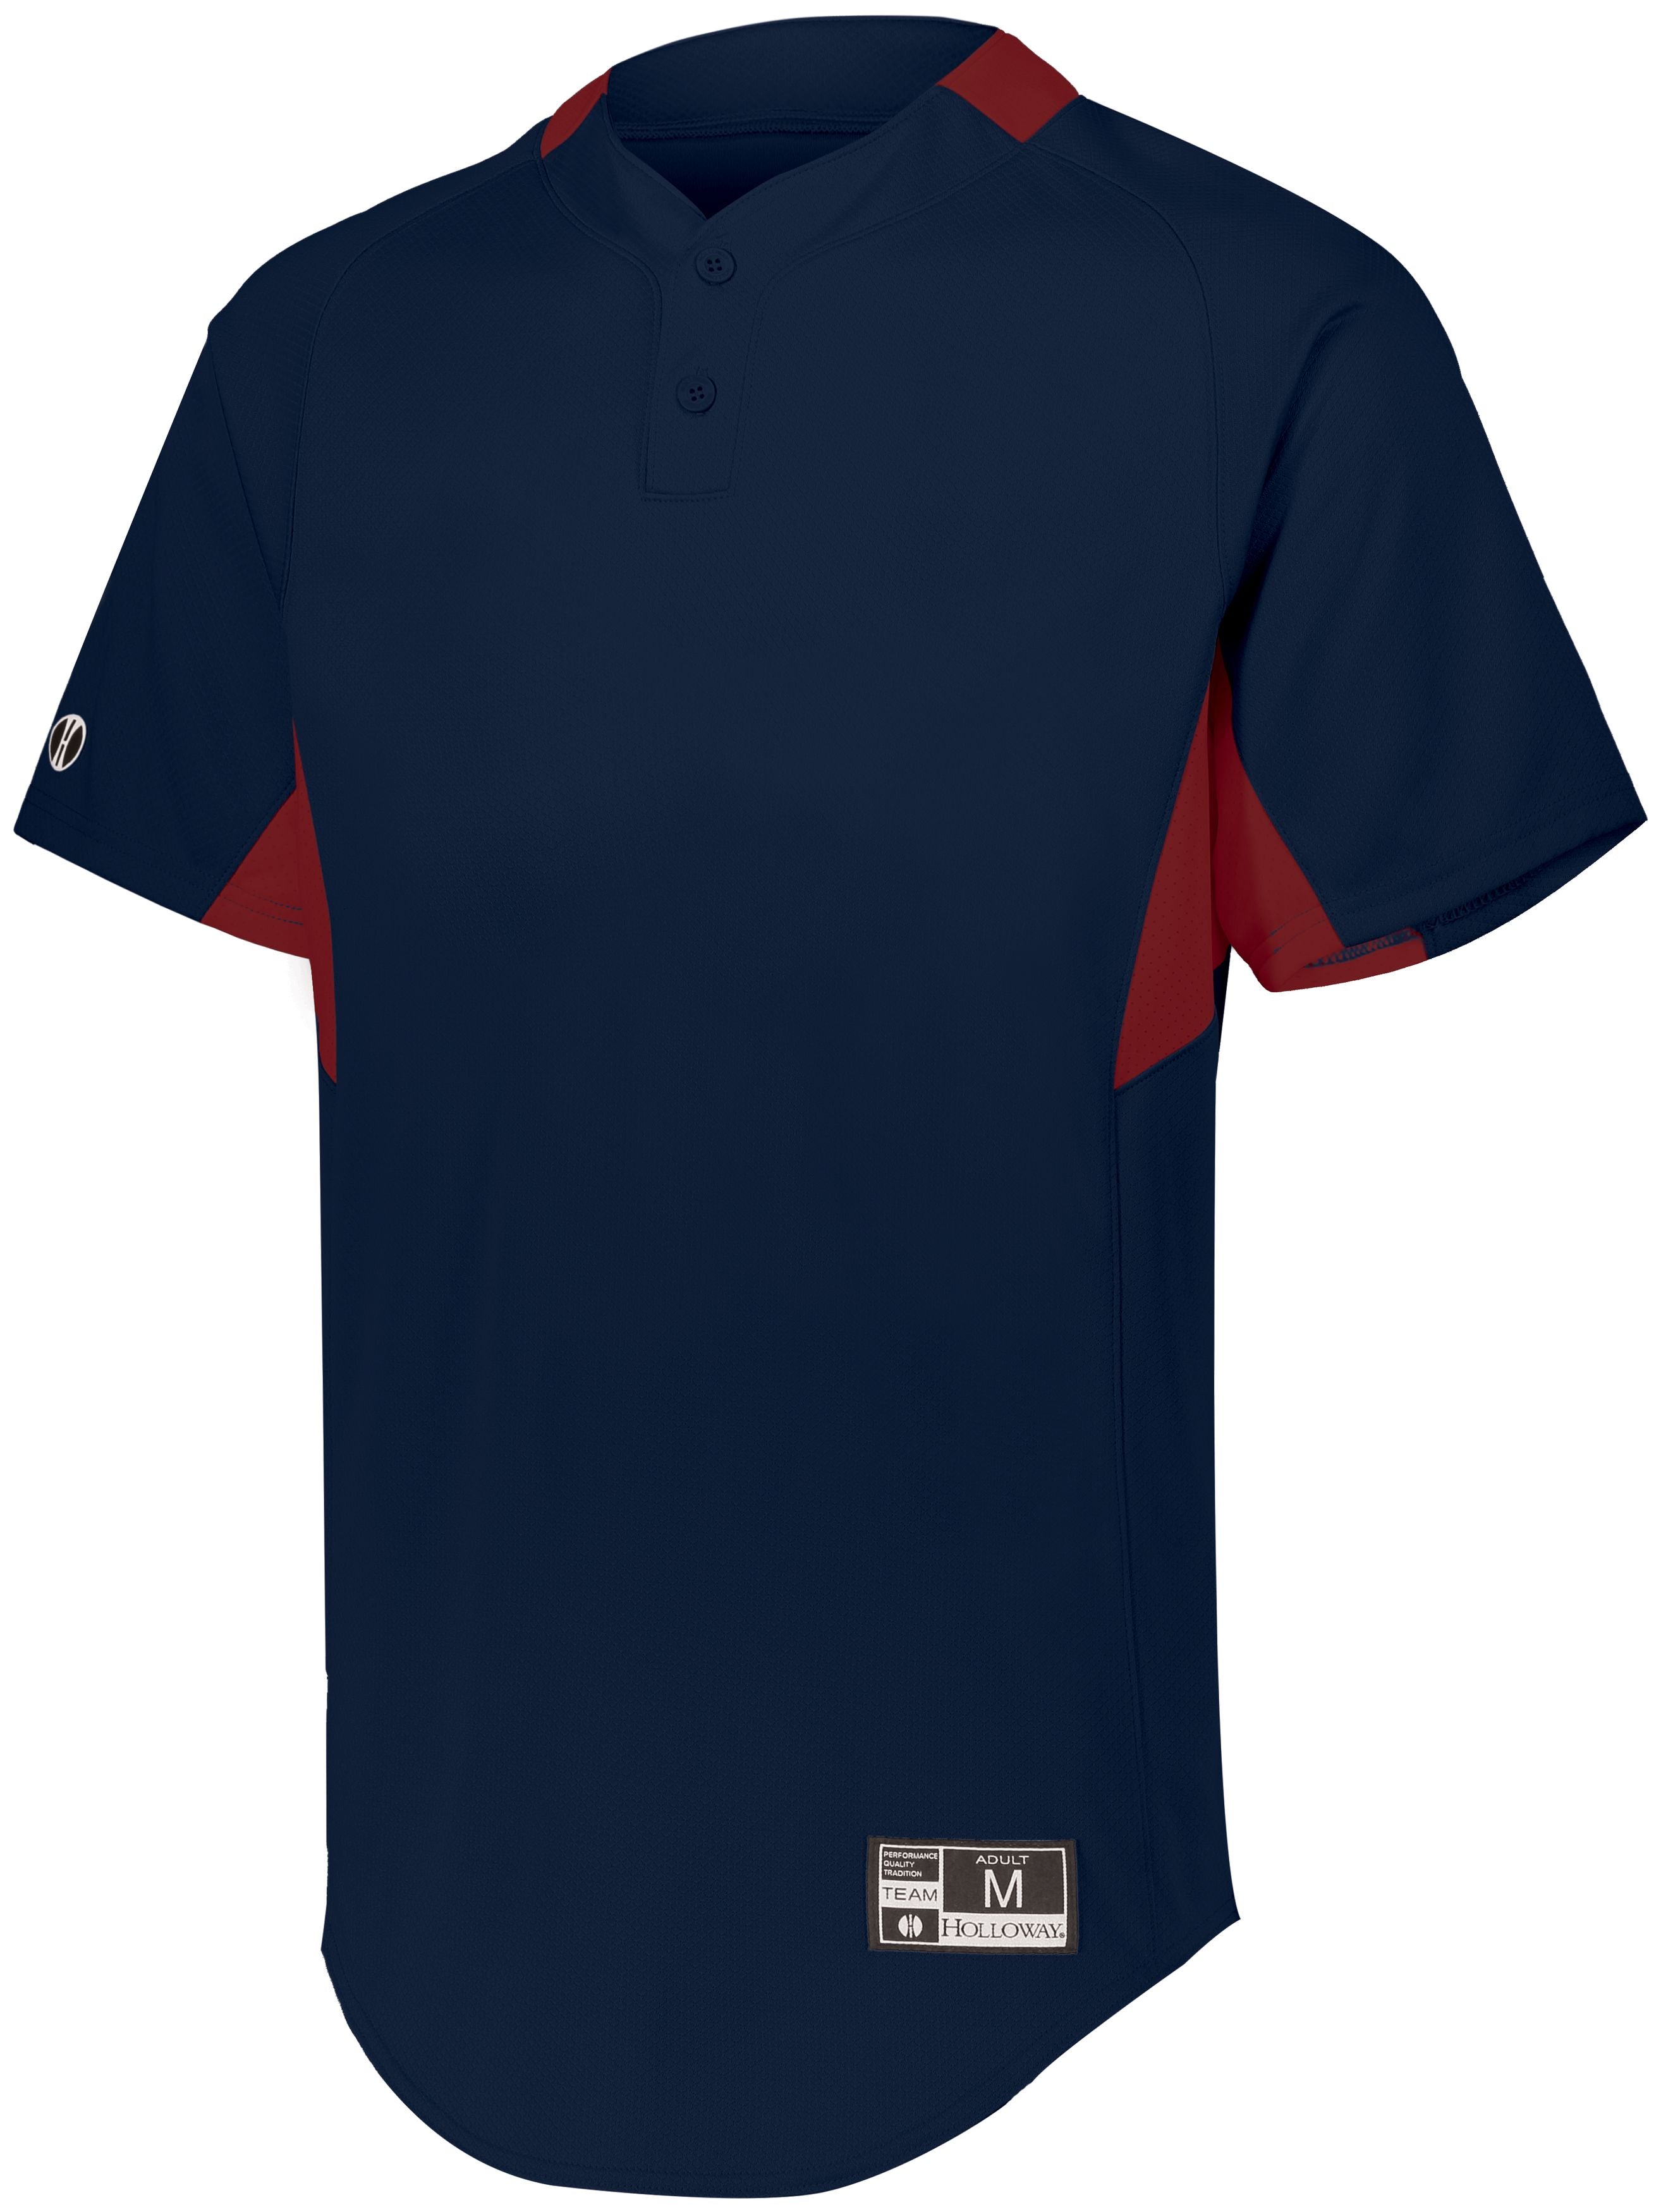 Holloway Youth  Game7 Two-Button Baseball Jersey in Navy/Scarlet  -Part of the Youth, Youth-Jersey, Baseball, Holloway, Shirts, All-Sports, All-Sports-1 product lines at KanaleyCreations.com